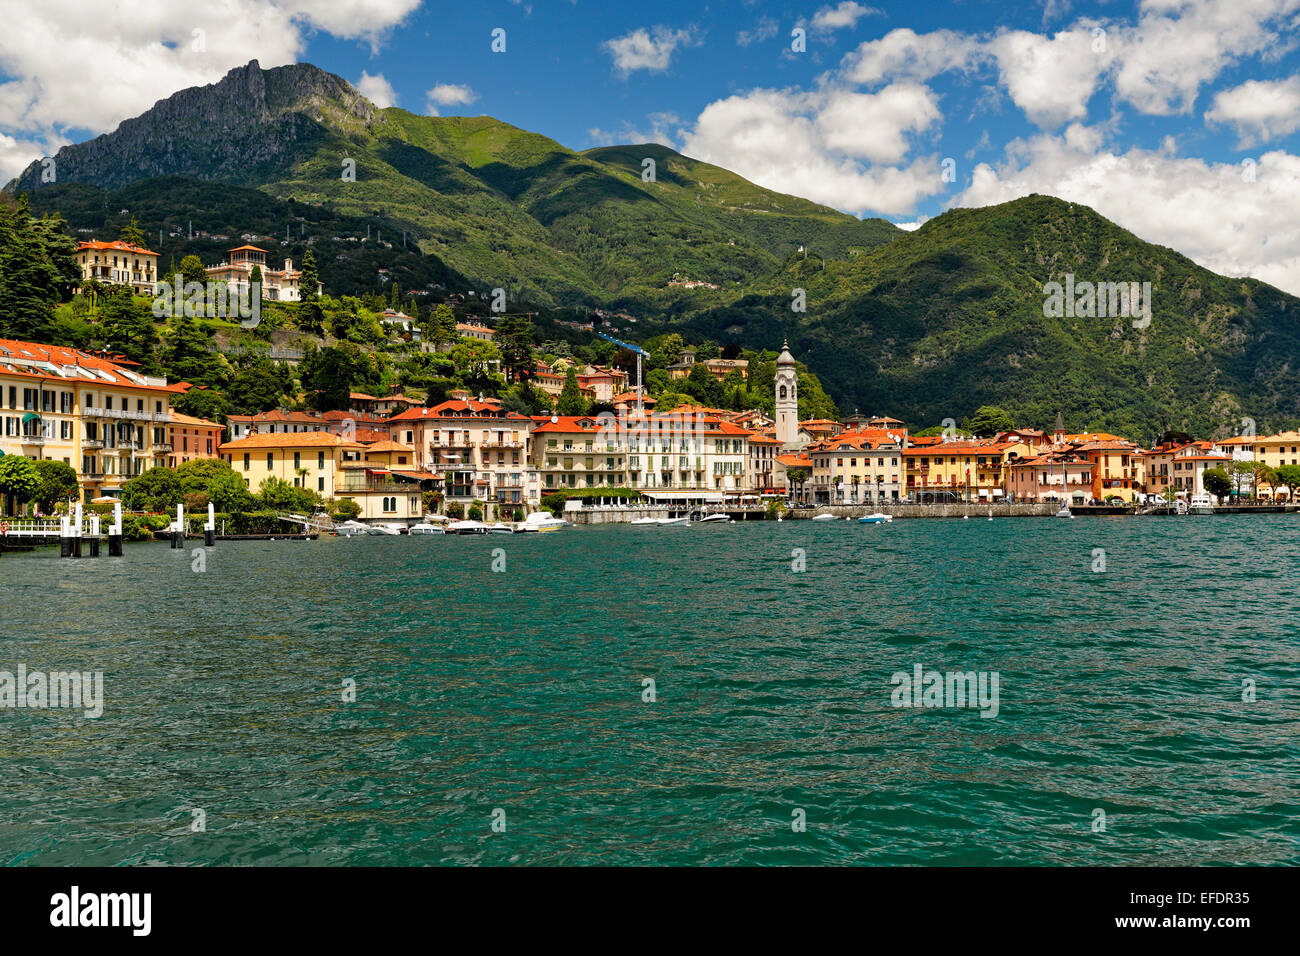 Low Angle View of a Lakeside Town, Bellagio, Lac de Côme, Lombardie, Italie Banque D'Images